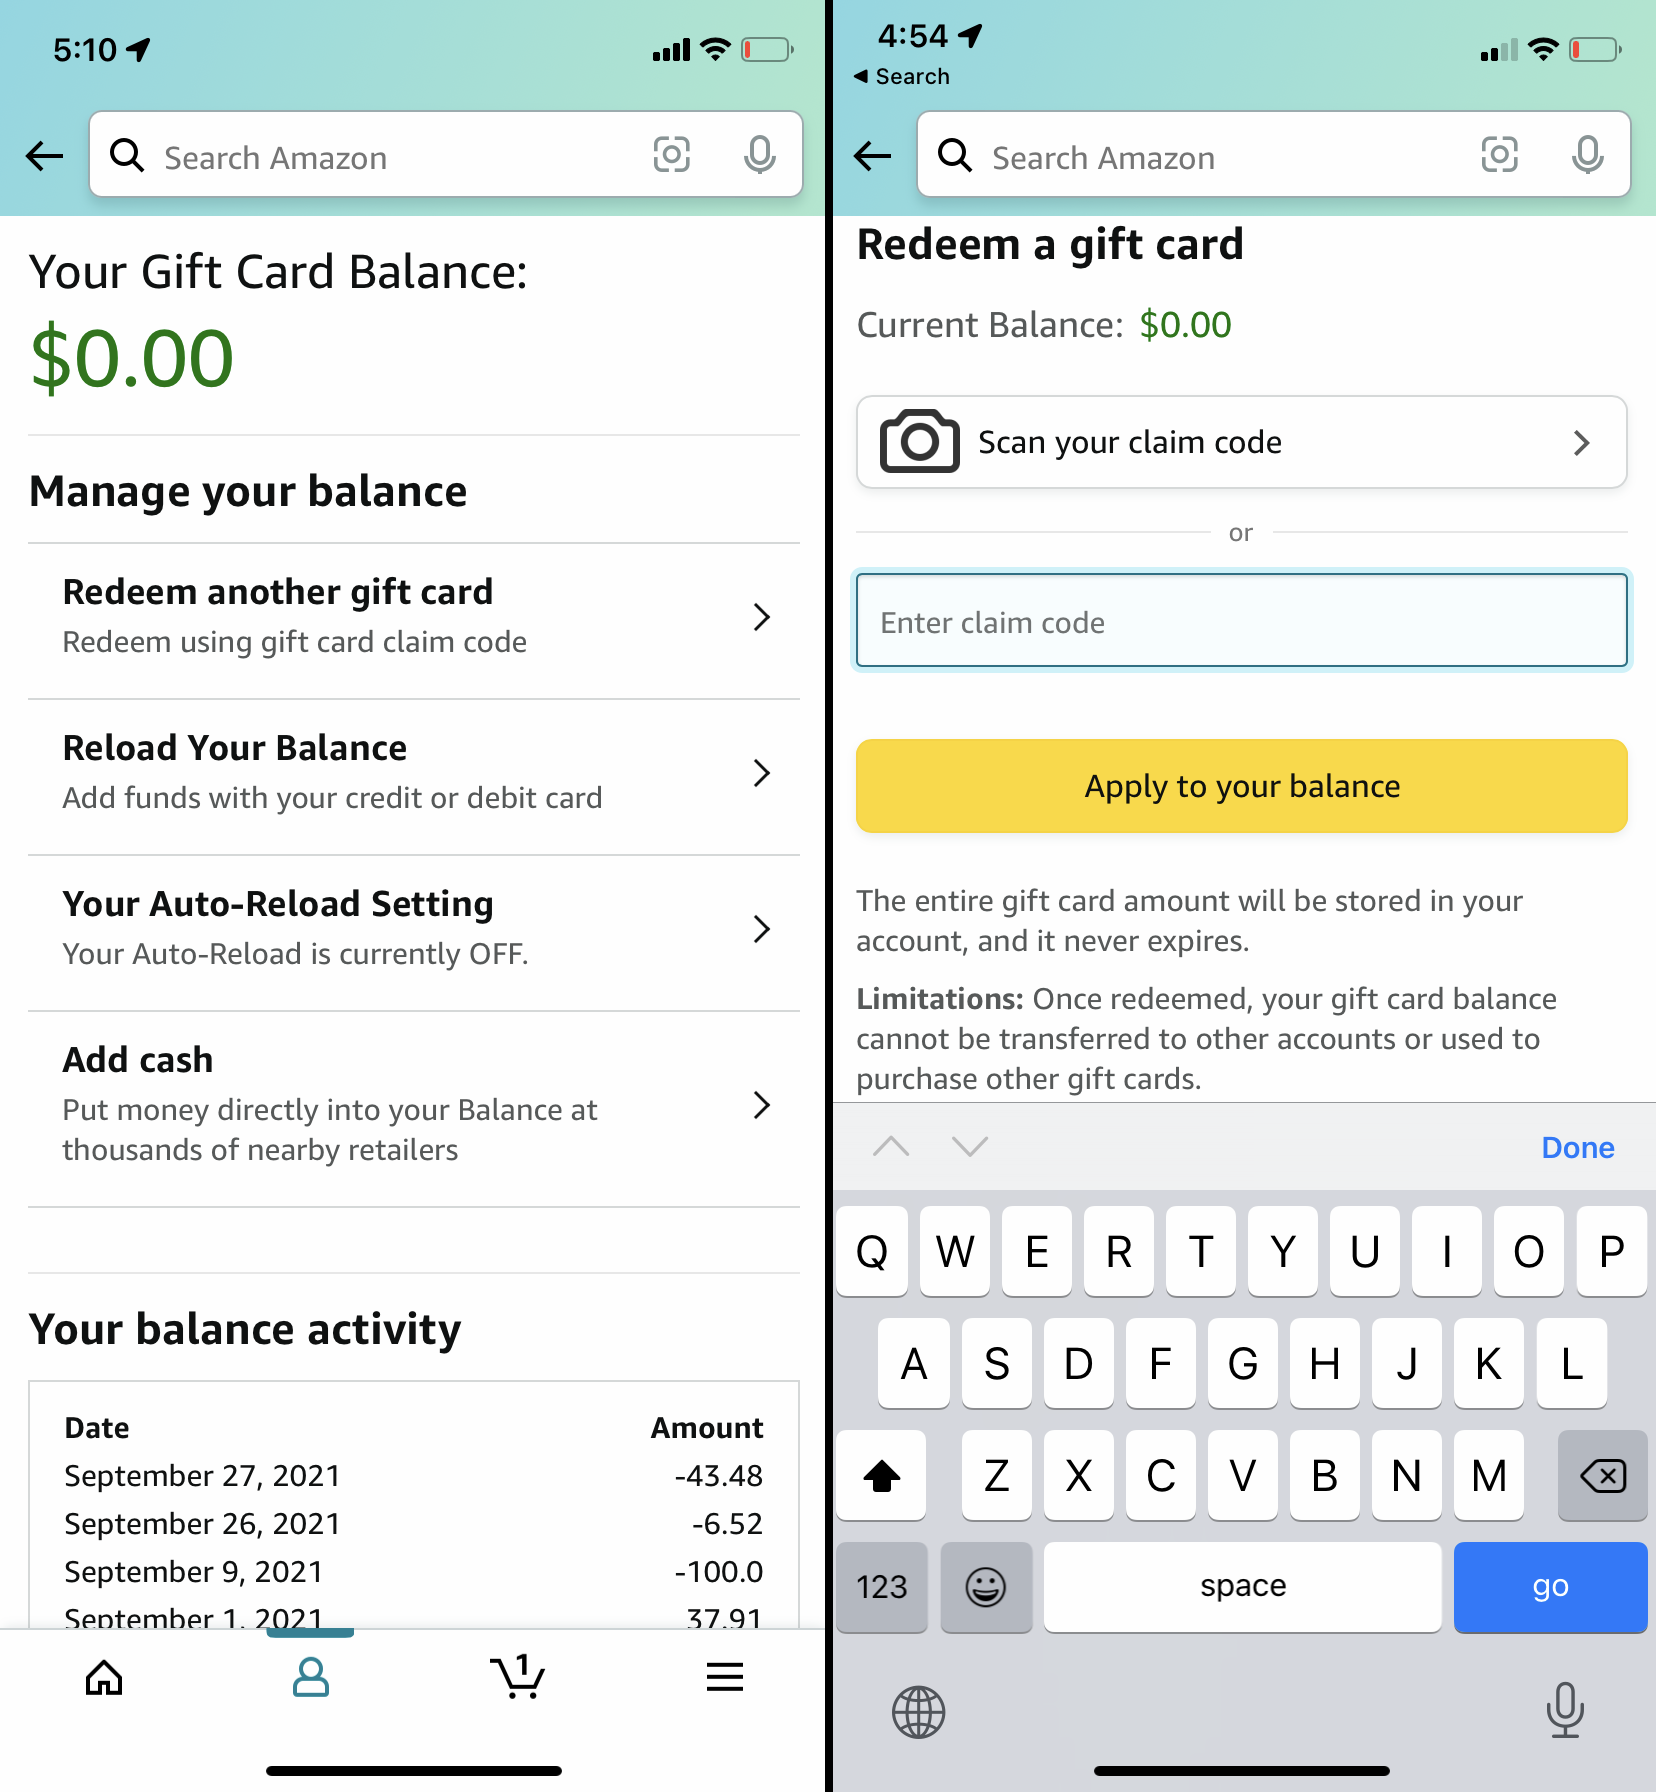 Two screenshots showing how to redeem a gift card in the Amazon app.